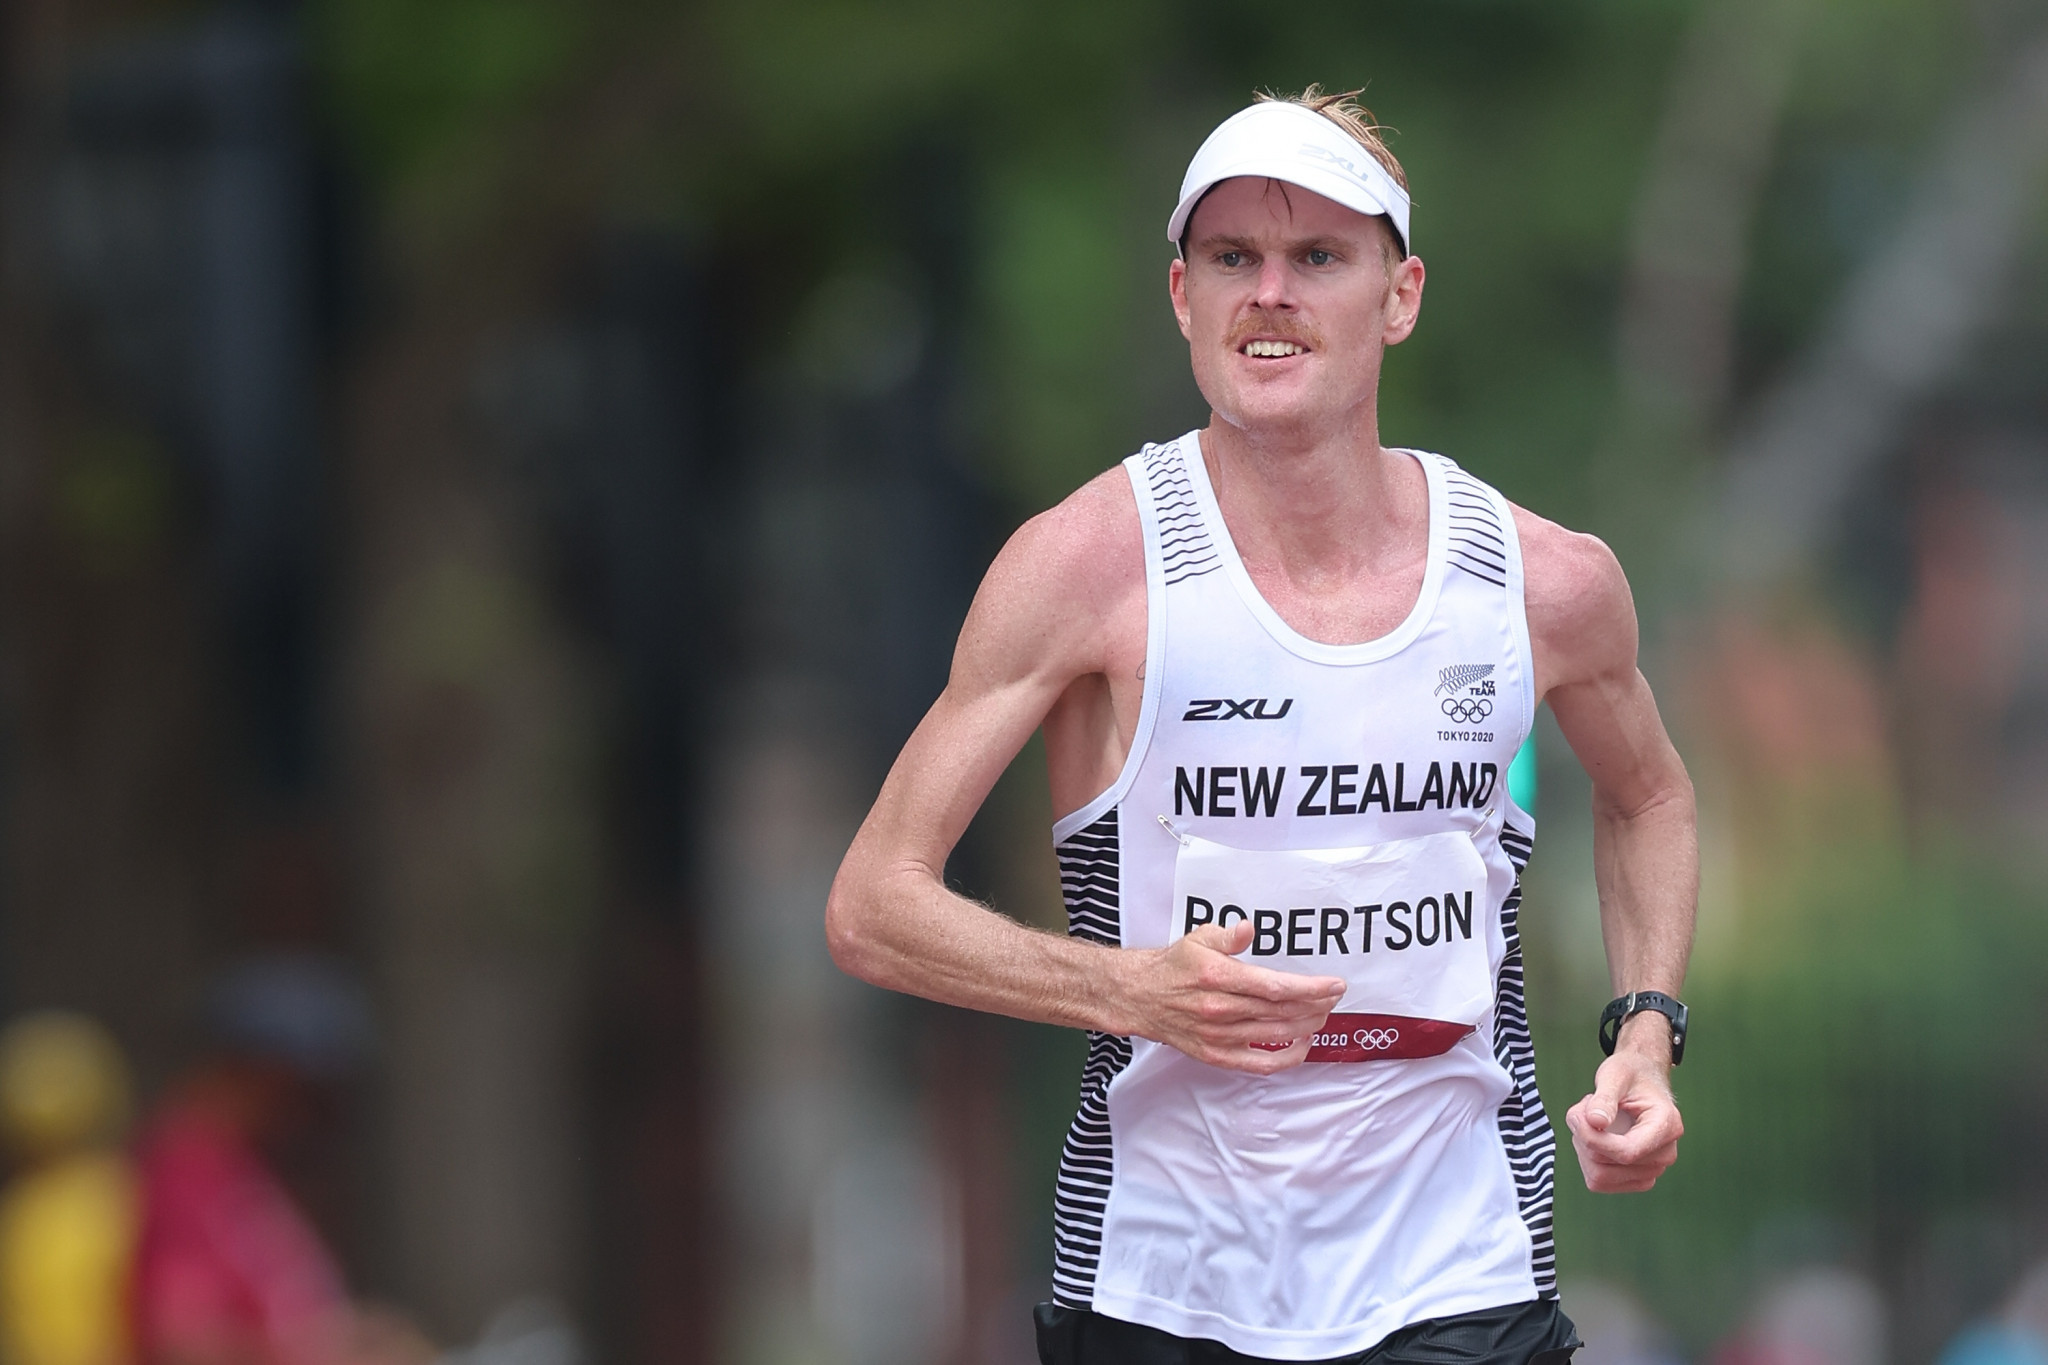 New Zealand runner Robertson banned for eight years for doping and false defence